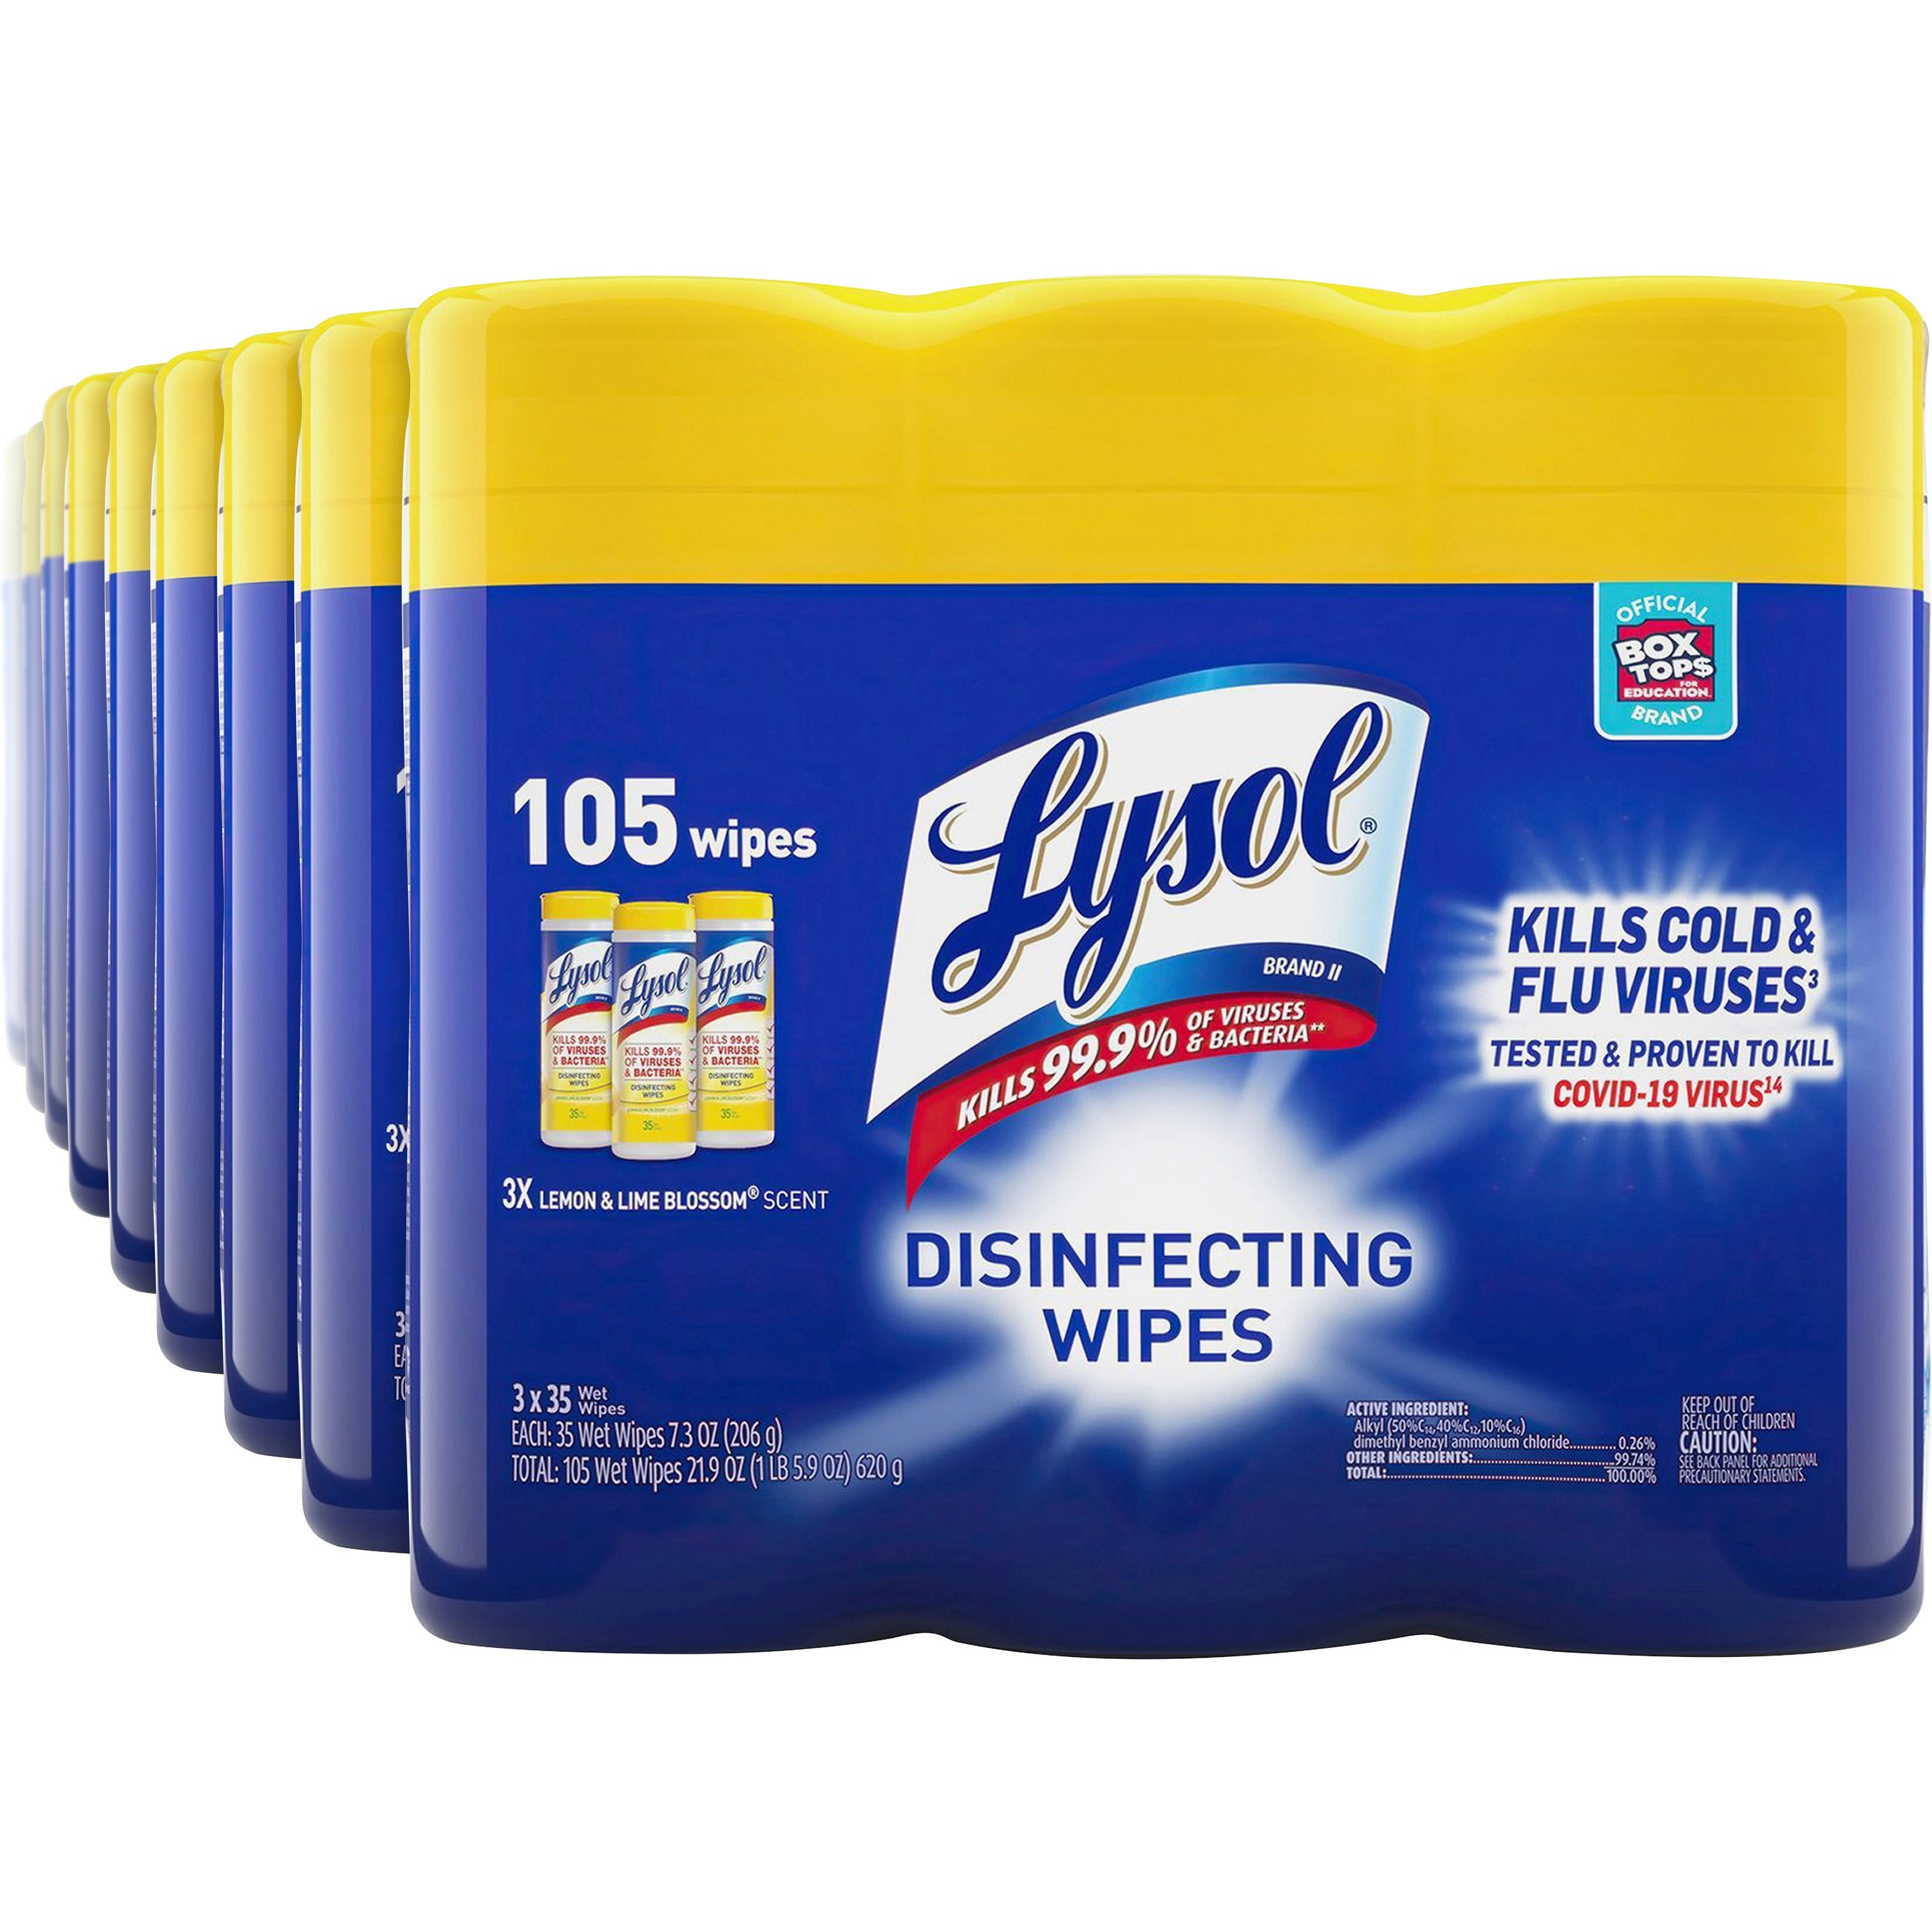 Clorox 3 Pack Disinfecting Wipes 3 Ea, Multi-Purpose & Specialty